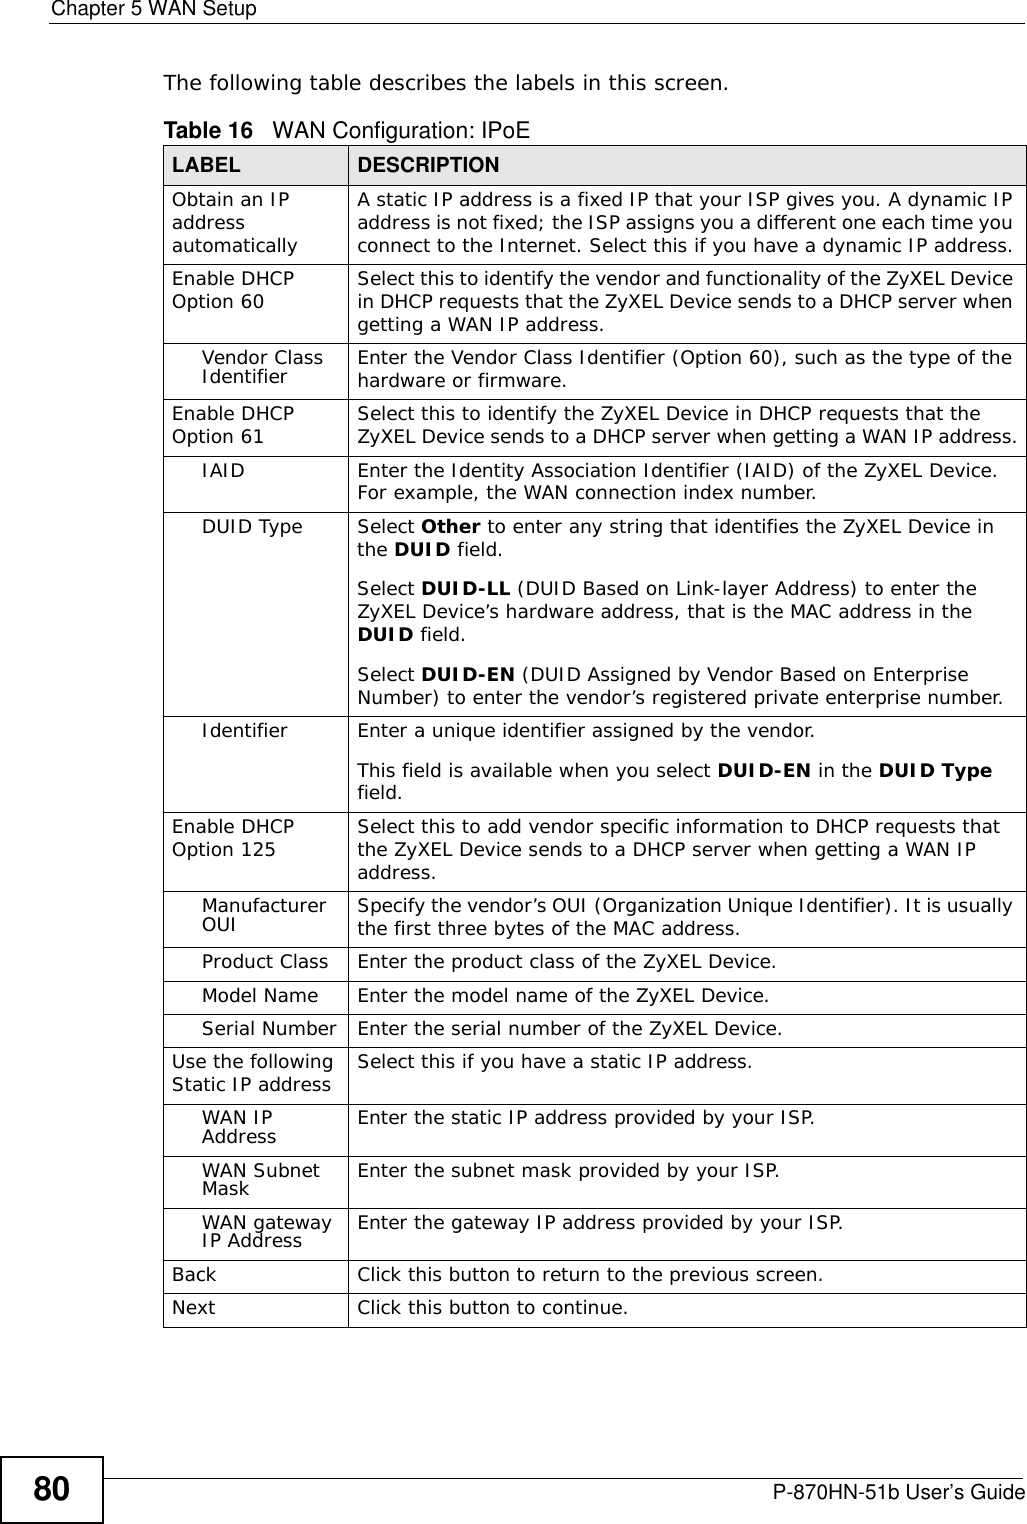 Chapter 5 WAN SetupP-870HN-51b User’s Guide80The following table describes the labels in this screen. Table 16   WAN Configuration: IPoE LABEL DESCRIPTIONObtain an IP address automaticallyA static IP address is a fixed IP that your ISP gives you. A dynamic IP address is not fixed; the ISP assigns you a different one each time you connect to the Internet. Select this if you have a dynamic IP address.Enable DHCP Option 60 Select this to identify the vendor and functionality of the ZyXEL Device in DHCP requests that the ZyXEL Device sends to a DHCP server when getting a WAN IP address.Vendor Class Identifier Enter the Vendor Class Identifier (Option 60), such as the type of the hardware or firmware.Enable DHCP Option 61 Select this to identify the ZyXEL Device in DHCP requests that the ZyXEL Device sends to a DHCP server when getting a WAN IP address.IAID Enter the Identity Association Identifier (IAID) of the ZyXEL Device. For example, the WAN connection index number.DUID Type Select Other to enter any string that identifies the ZyXEL Device in the DUID field.Select DUID-LL (DUID Based on Link-layer Address) to enter the ZyXEL Device’s hardware address, that is the MAC address in the DUID field.Select DUID-EN (DUID Assigned by Vendor Based on Enterprise Number) to enter the vendor’s registered private enterprise number.Identifier Enter a unique identifier assigned by the vendor.This field is available when you select DUID-EN in the DUID Type field.Enable DHCP Option 125 Select this to add vendor specific information to DHCP requests that the ZyXEL Device sends to a DHCP server when getting a WAN IP address.Manufacturer OUI Specify the vendor’s OUI (Organization Unique Identifier). It is usually the first three bytes of the MAC address.Product Class Enter the product class of the ZyXEL Device.Model Name Enter the model name of the ZyXEL Device.Serial Number Enter the serial number of the ZyXEL Device.Use the following Static IP address Select this if you have a static IP address.WAN IP Address Enter the static IP address provided by your ISP.WAN Subnet Mask Enter the subnet mask provided by your ISP.WAN gateway IP Address Enter the gateway IP address provided by your ISP.Back Click this button to return to the previous screen.Next Click this button to continue.